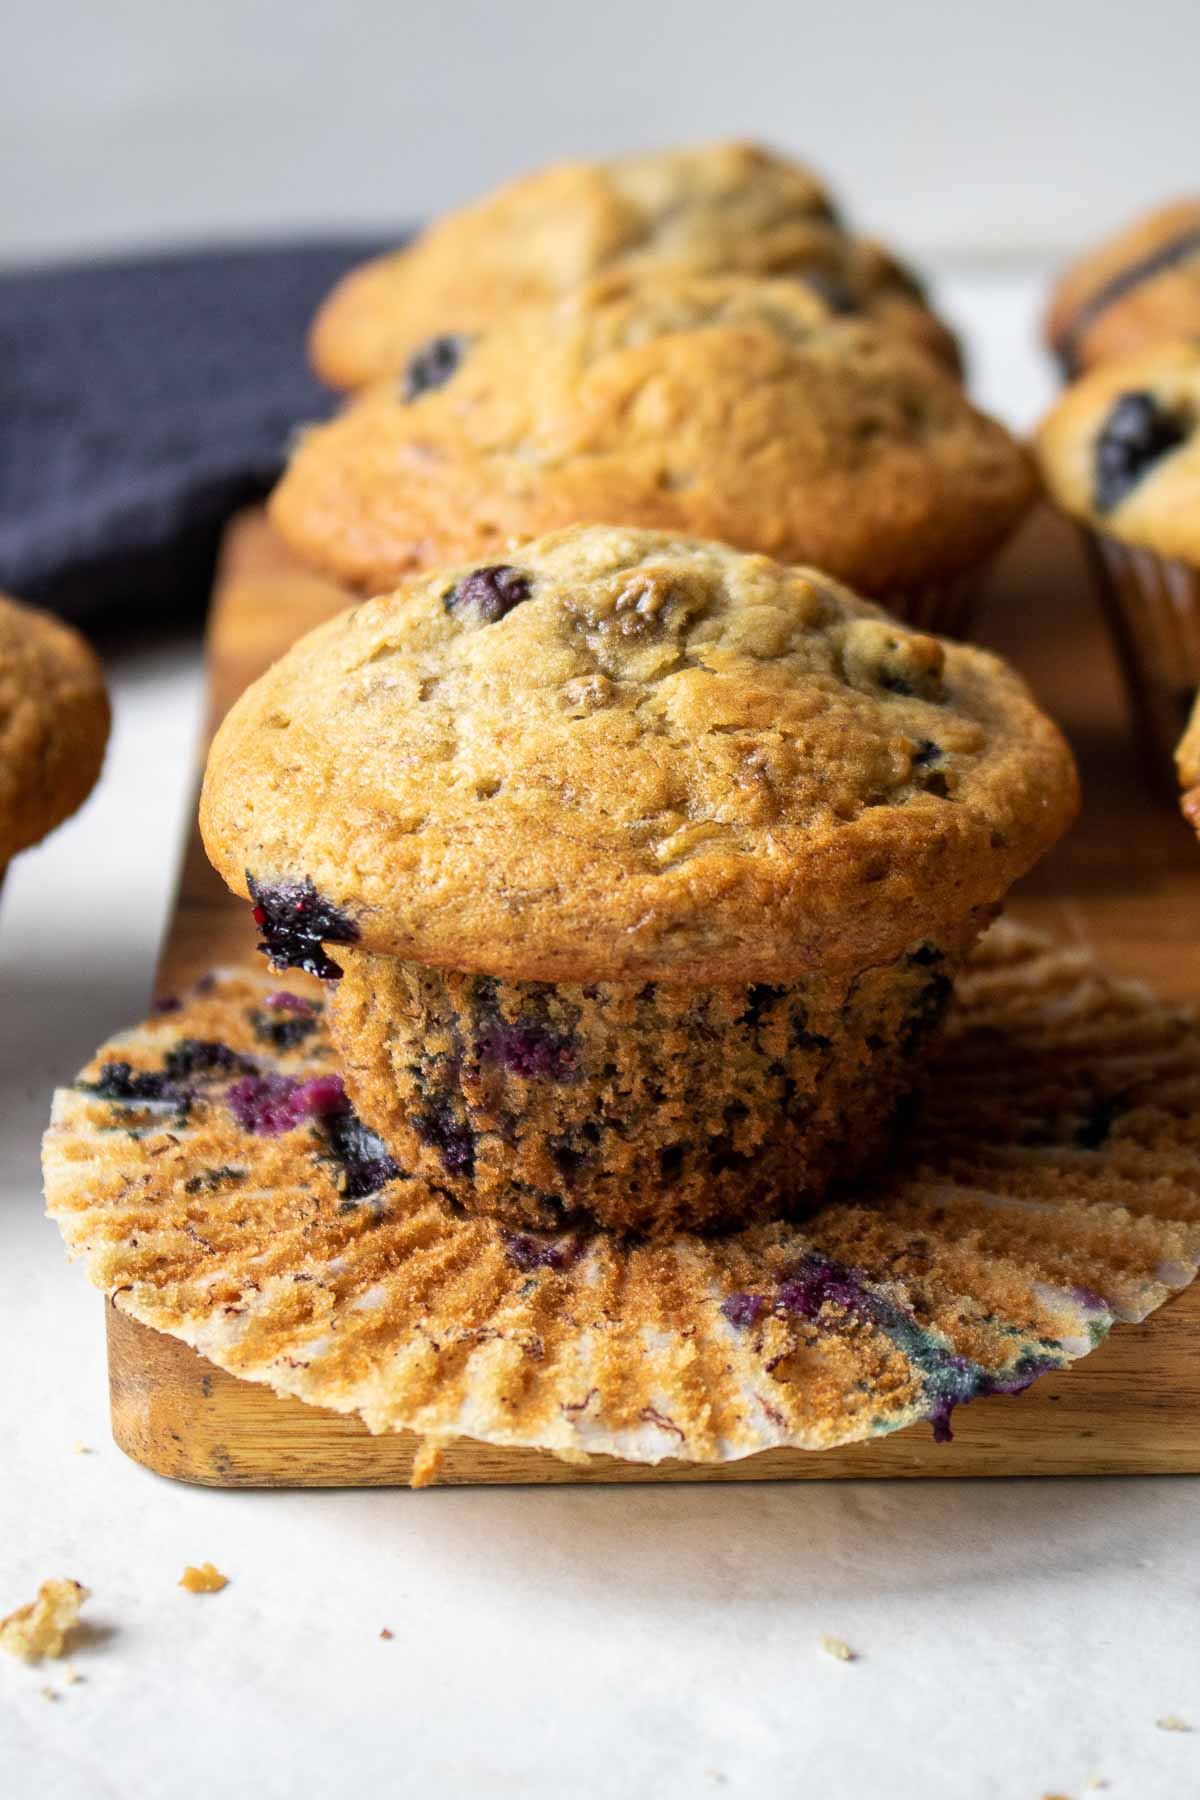 Blueberry banana muffins on a cutting board in an open muffin liner ready to eat